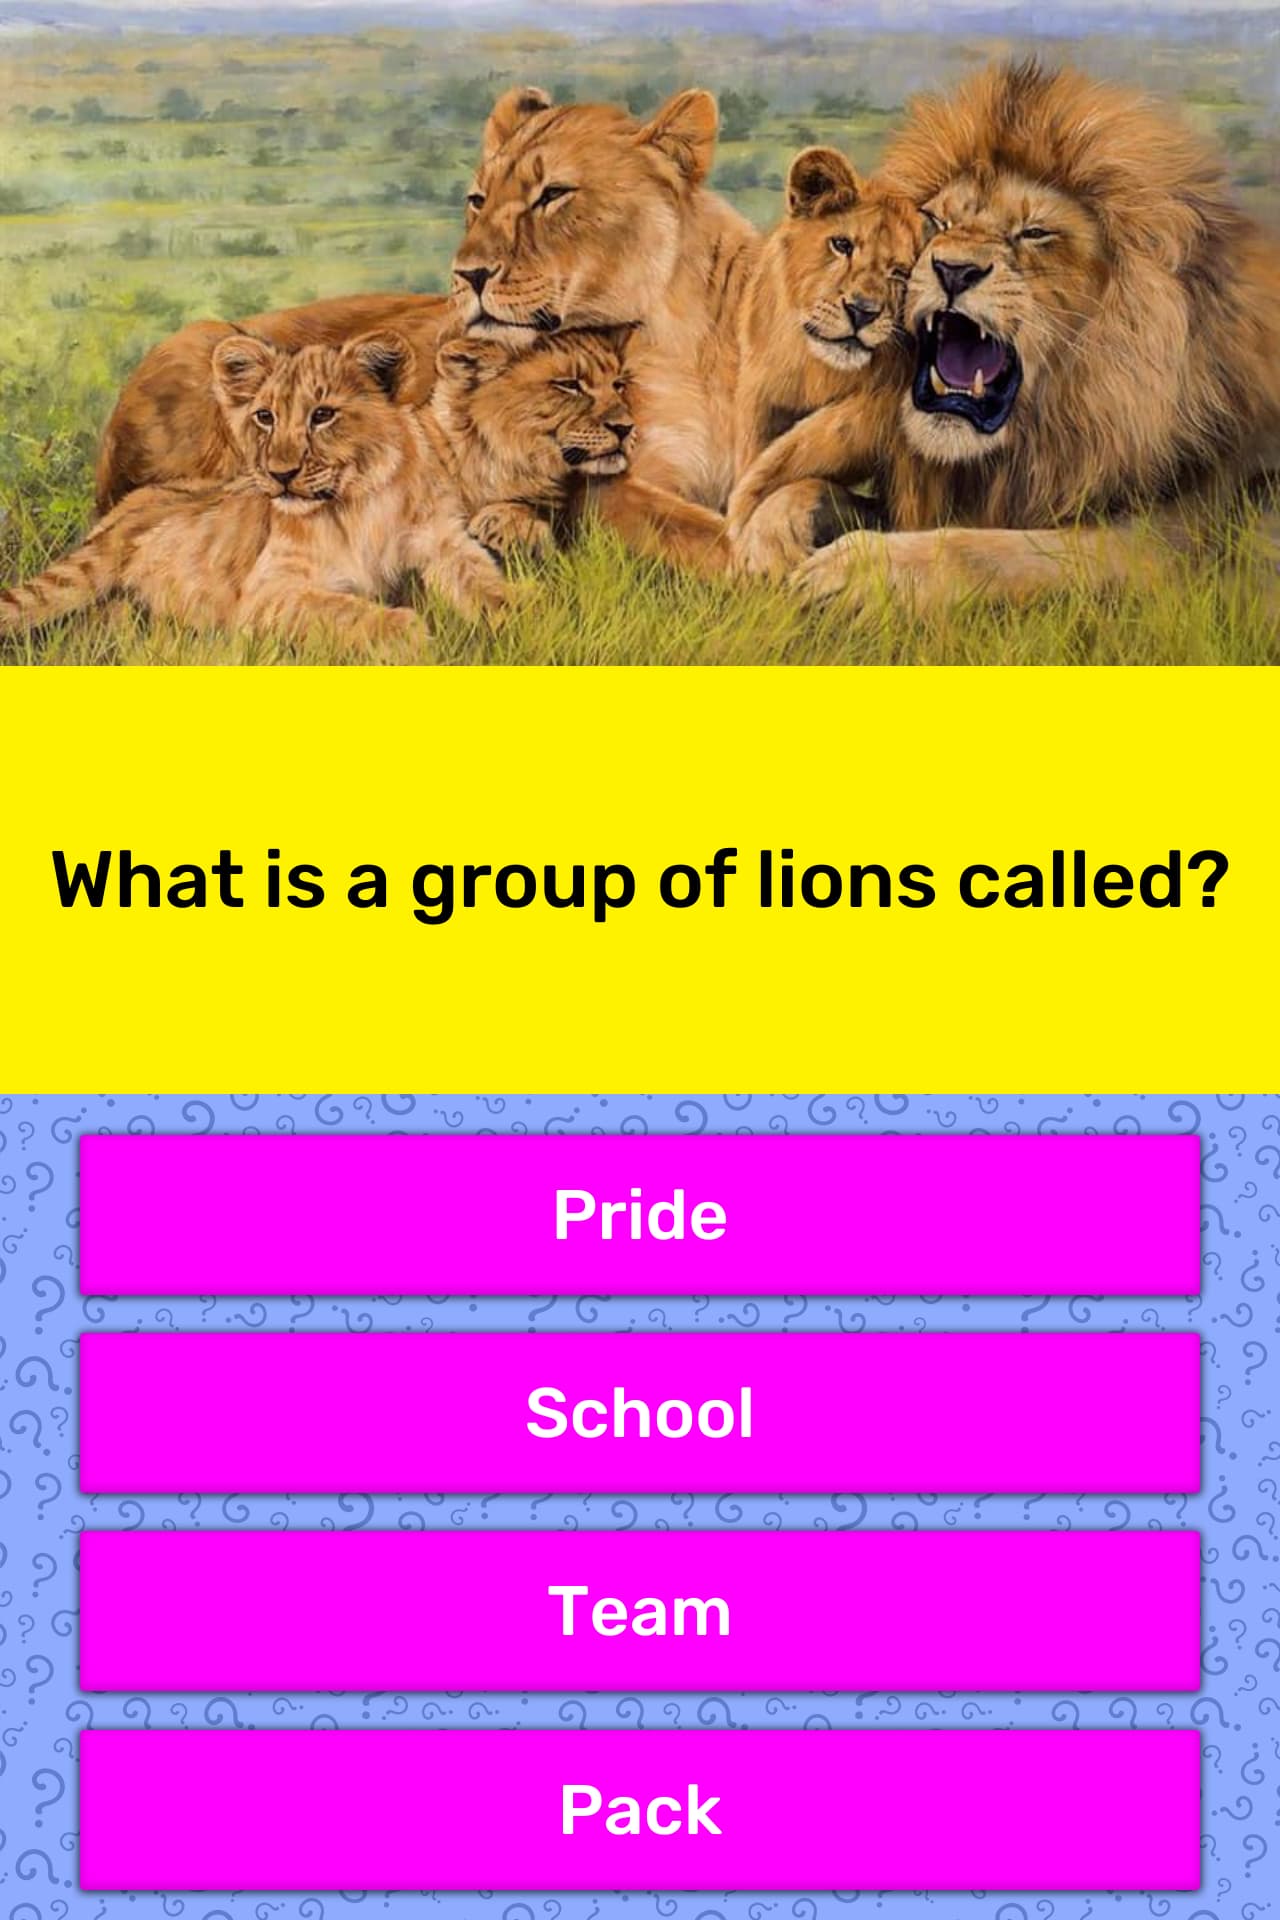 What do you call a group of Lions?